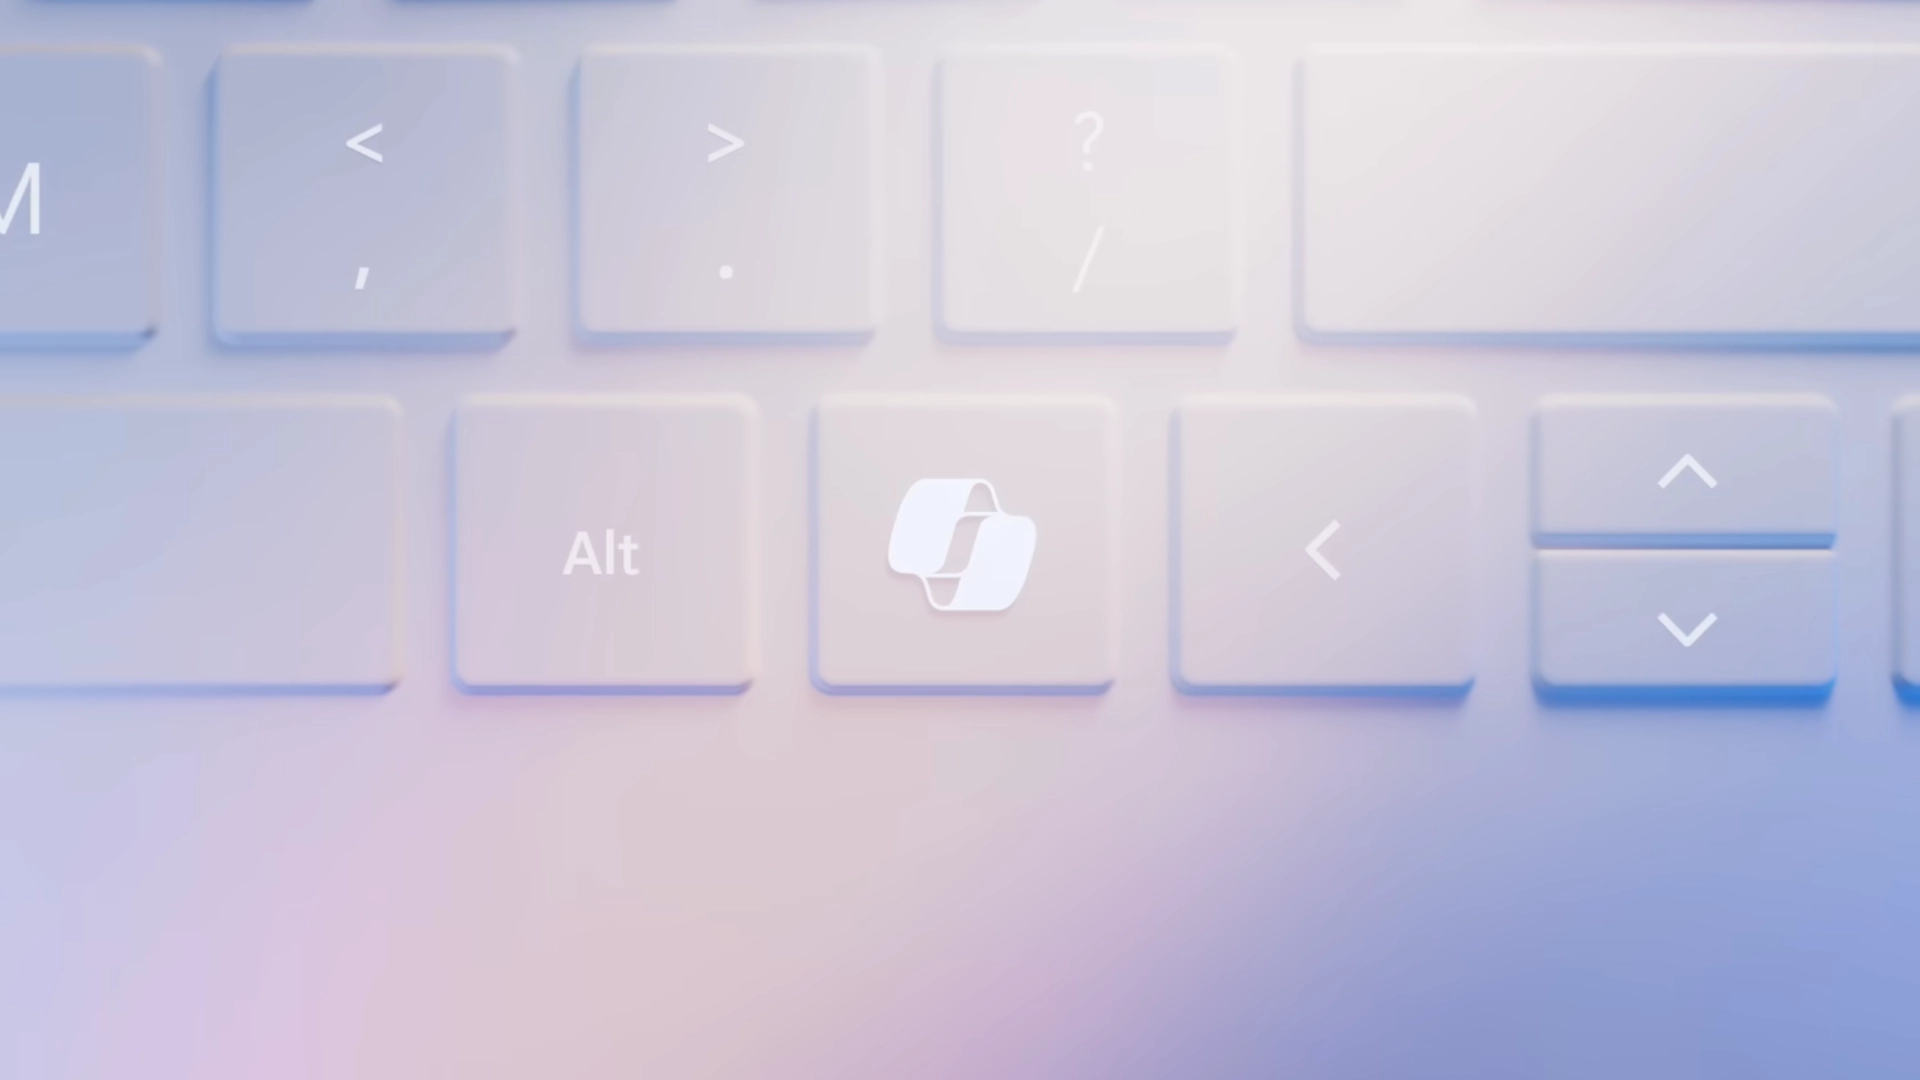 Future Windows 11 PCs will have a Copilot button on the keyboard to launch the AI ​​assistant